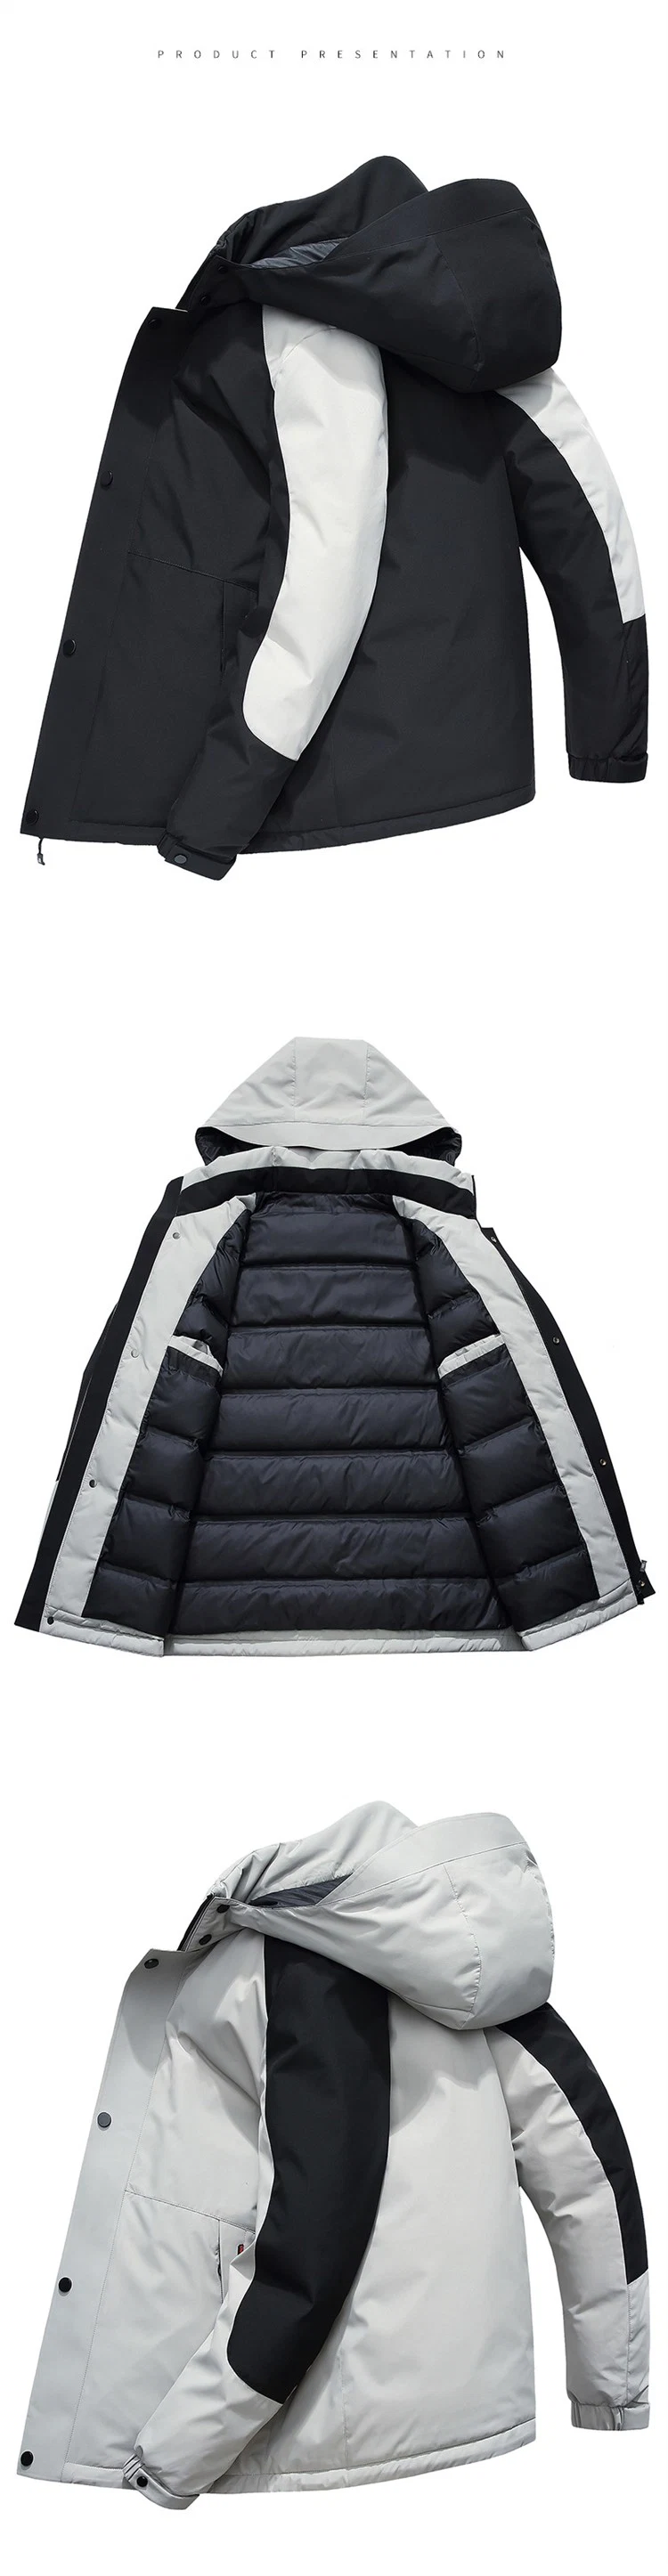 Wholesale Custom Cheap Winter Down Filled Jacket New Mens Long White Black Warm Hooded 90% Duck Down Jacket